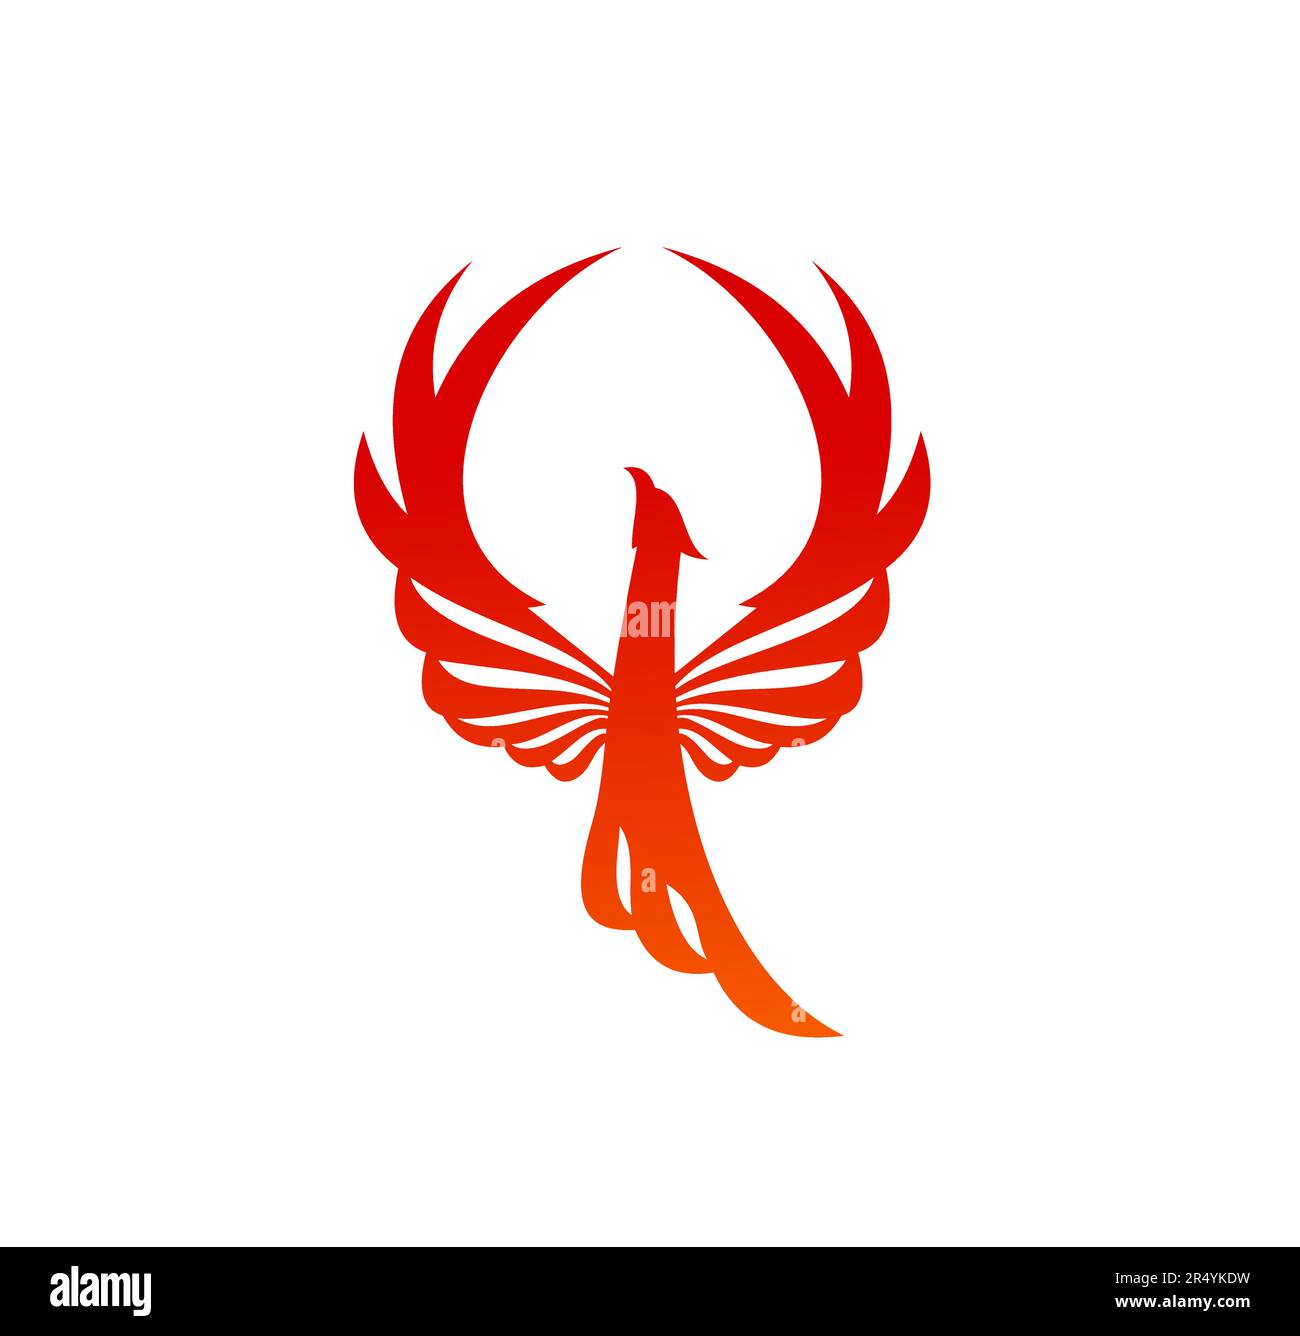 Phoenix bird with fire flames vector silhouette. Burning firebird, fenix or phoenix fantasy bird with raised wings. Abstract eagle or falcon with flaming feathers, wings and tail heraldic emblem Stock Vector